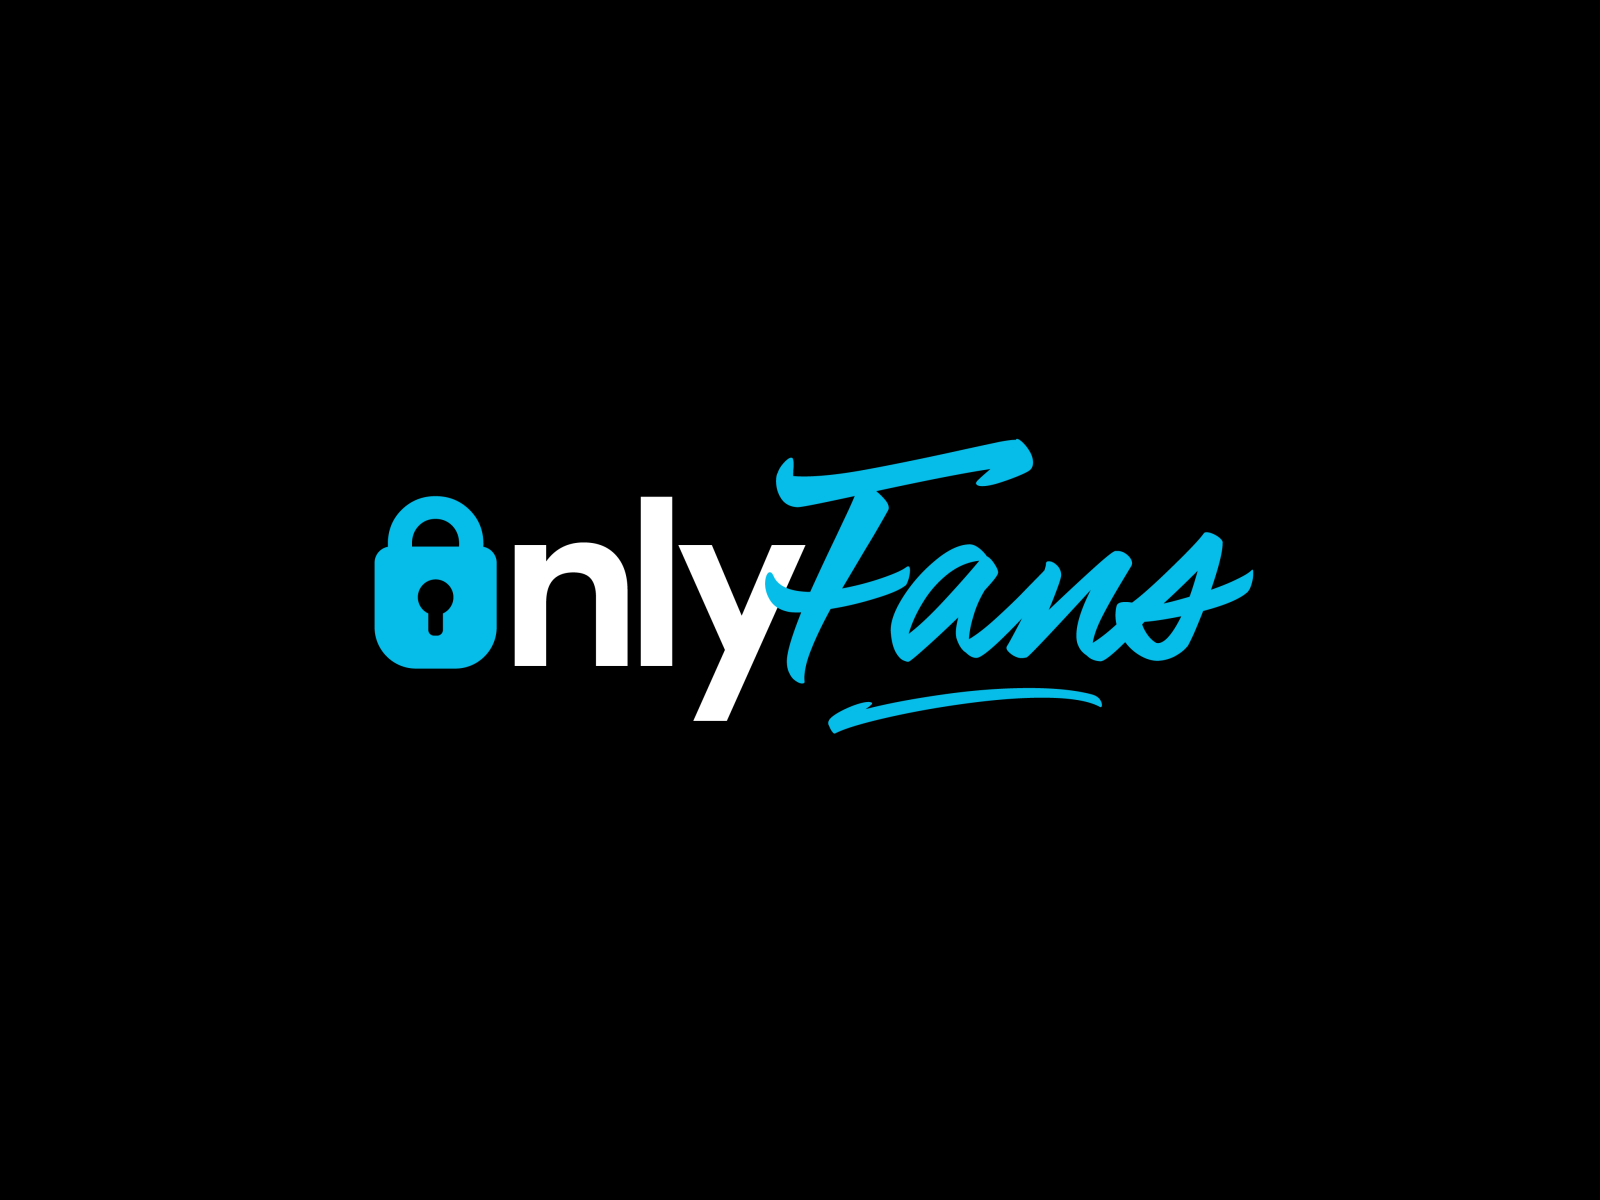 Onlyfans sign in